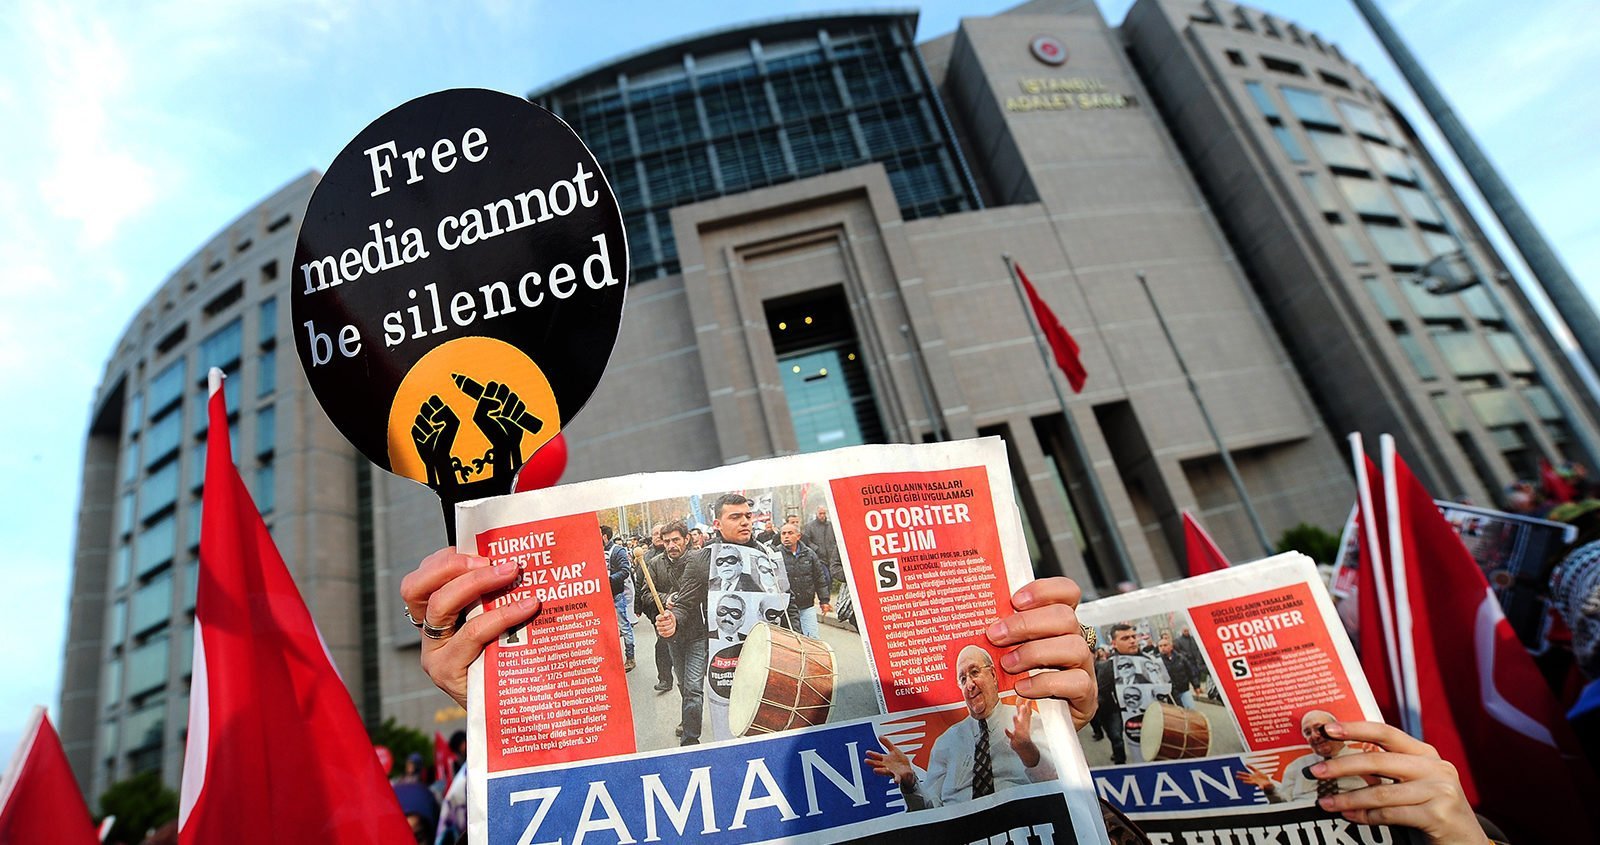 A banner in support of free media outside a courthouse in Turkey.